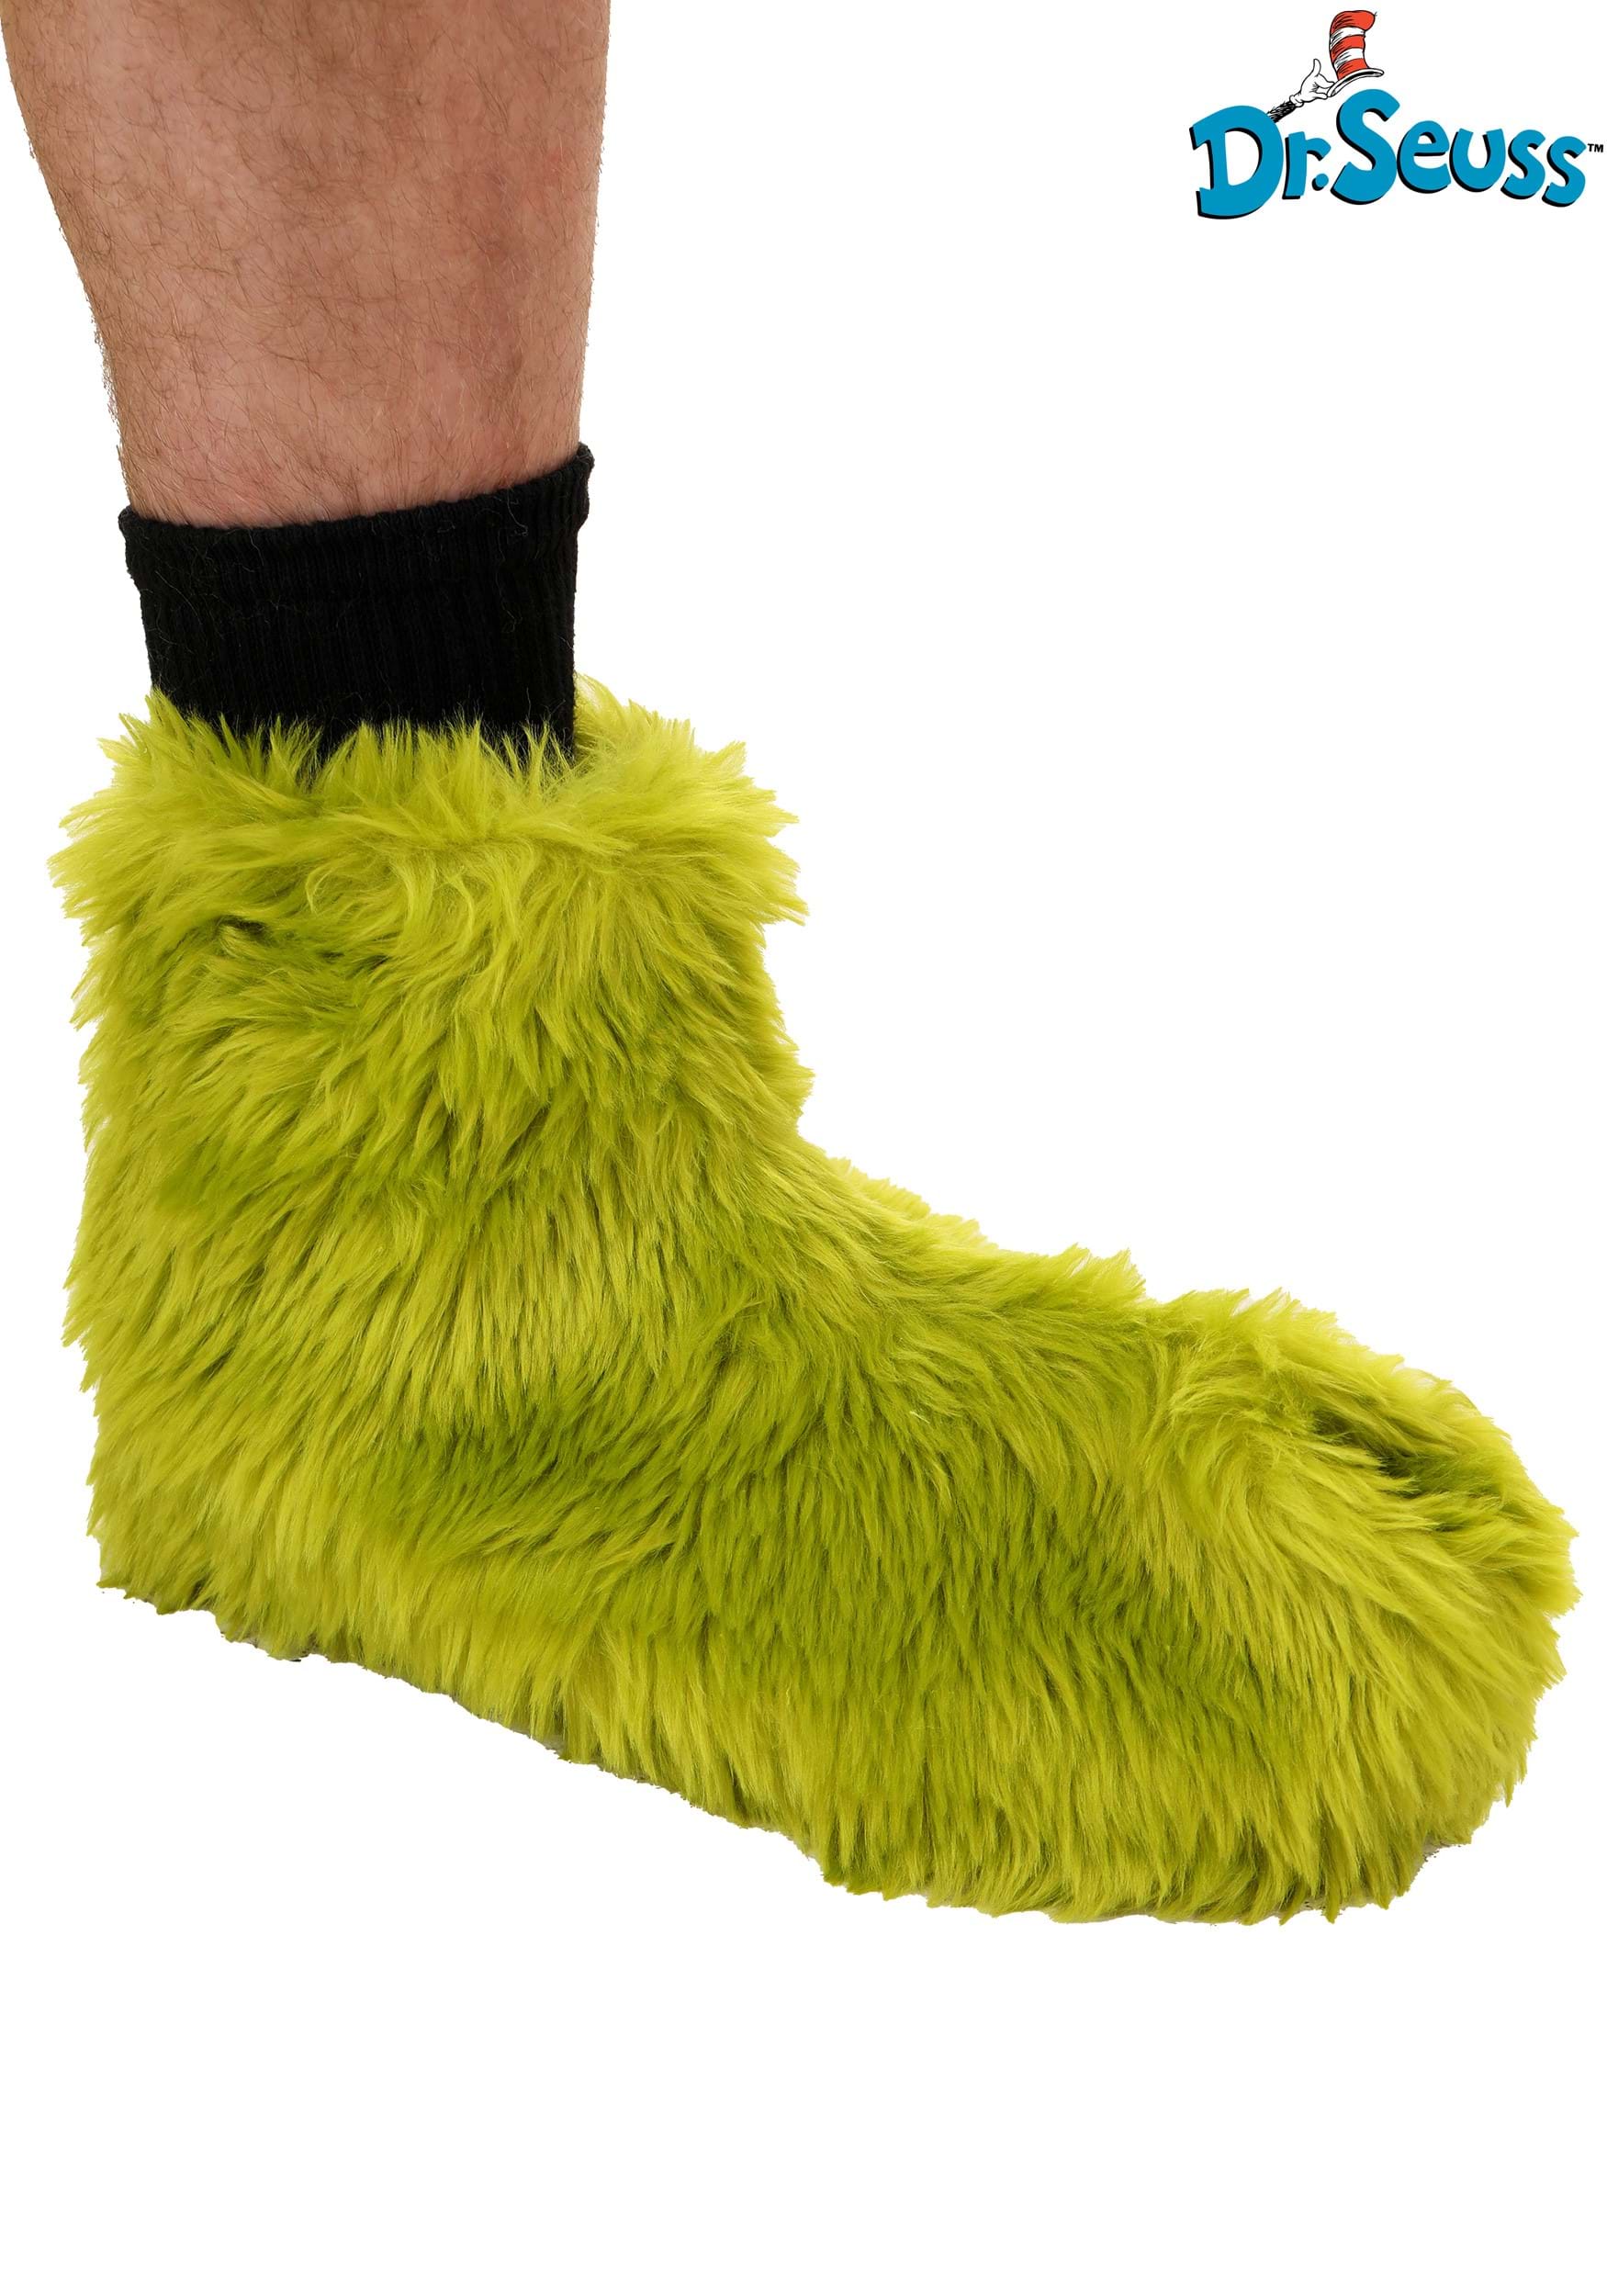 The Grinch Fuzzy Cap Apparel Accessories